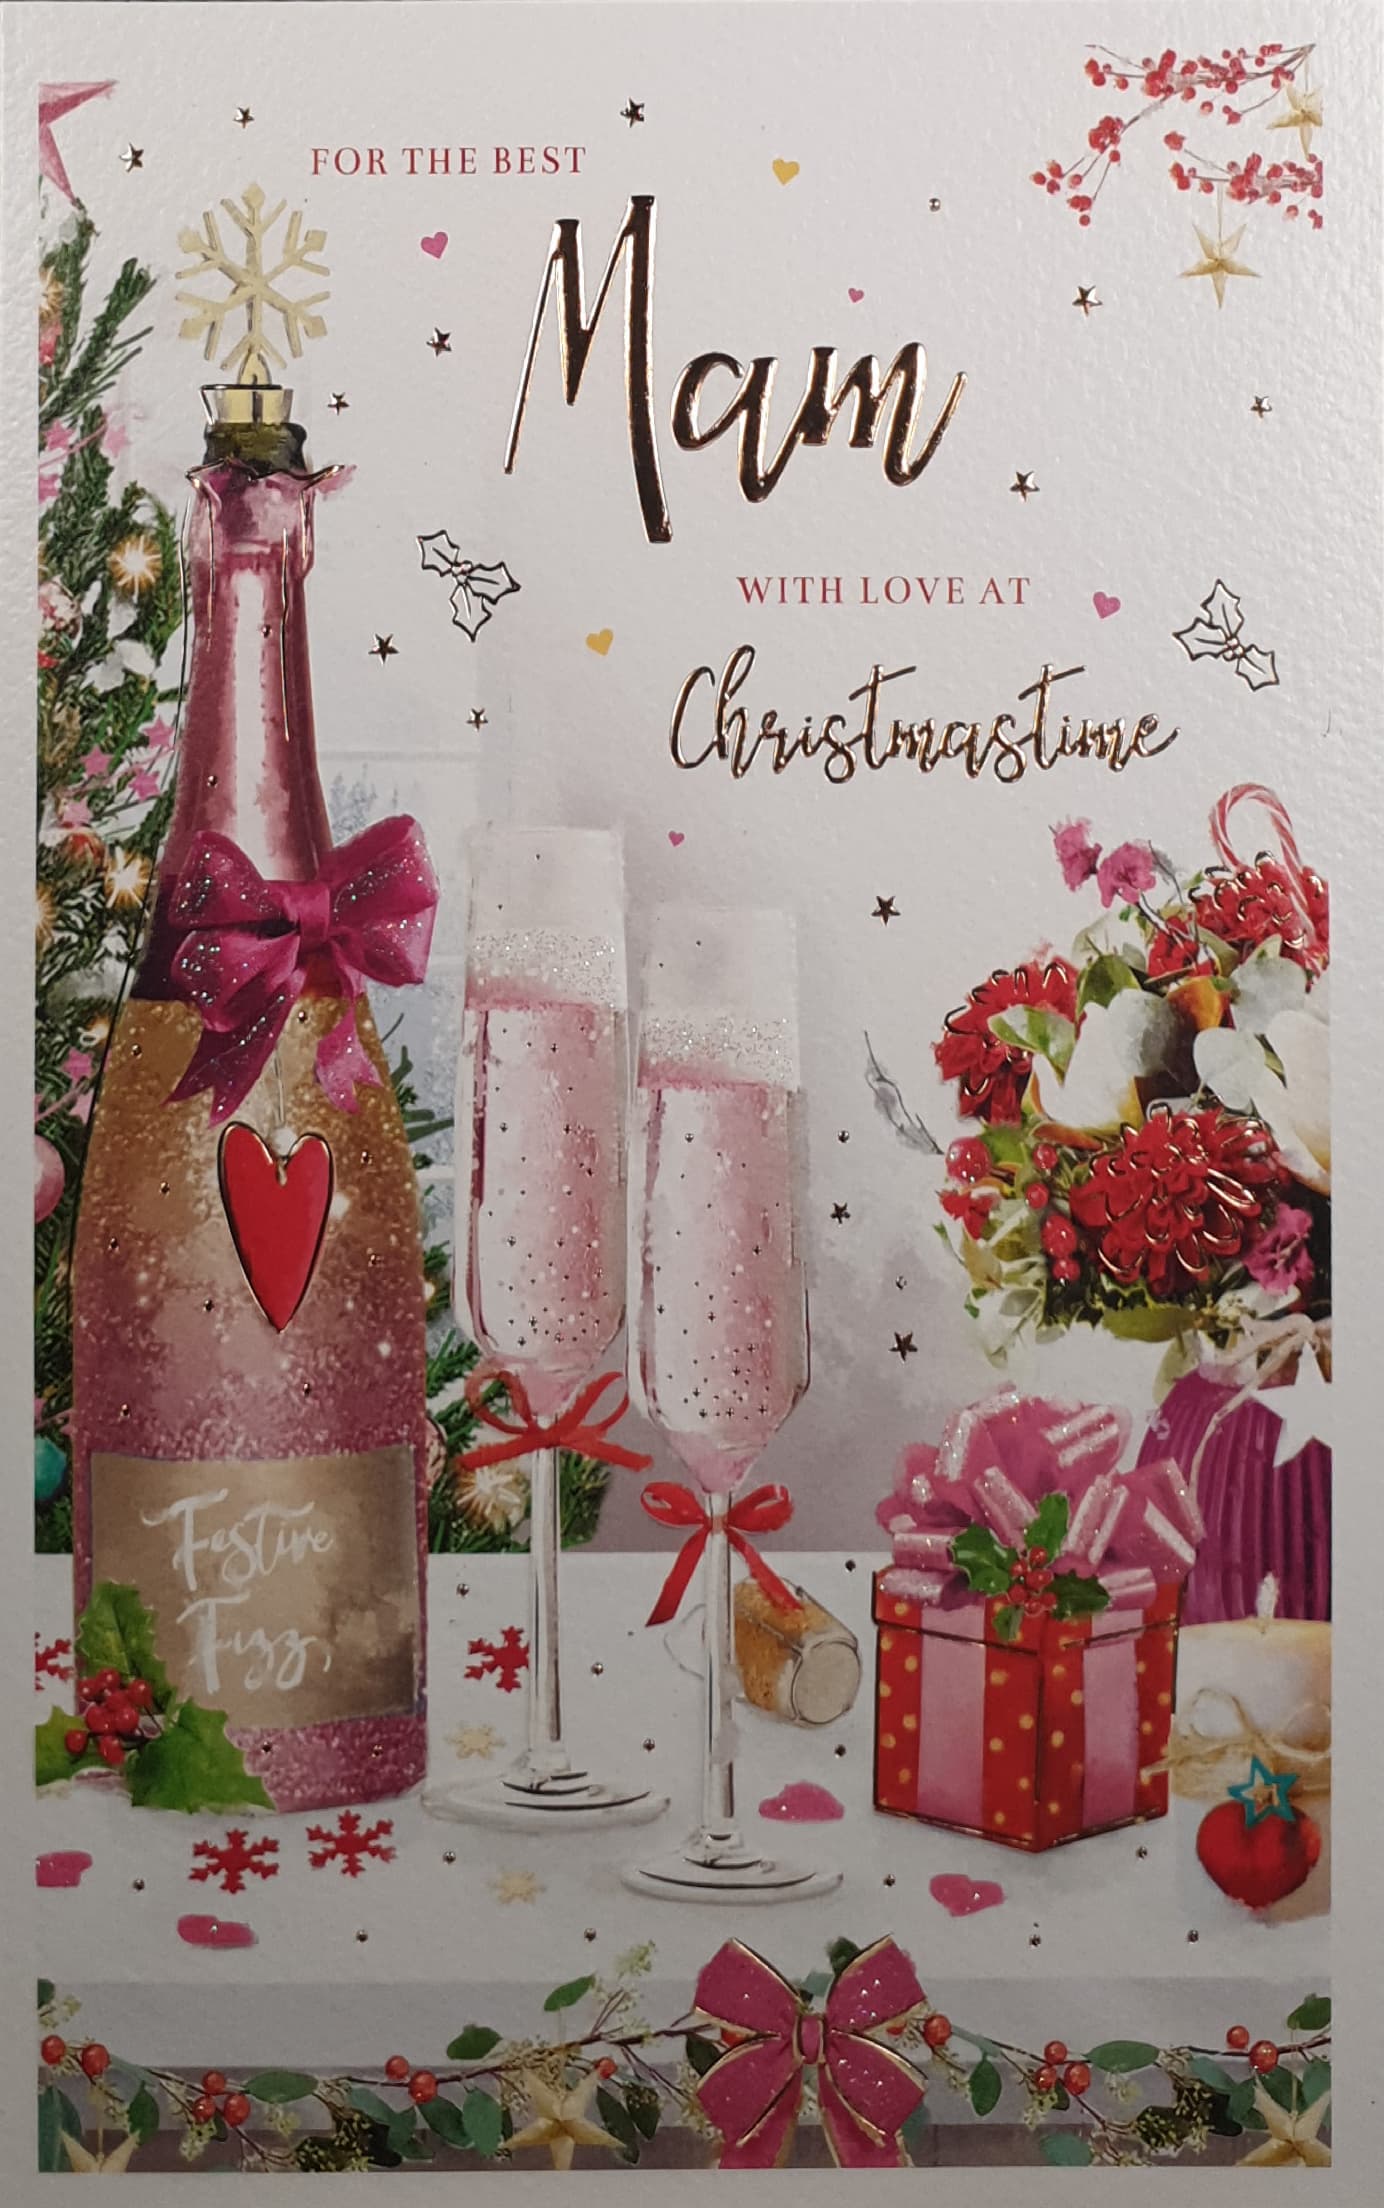 Mam Christmas Card - Pink Champagne & Gift on Table with Flowers